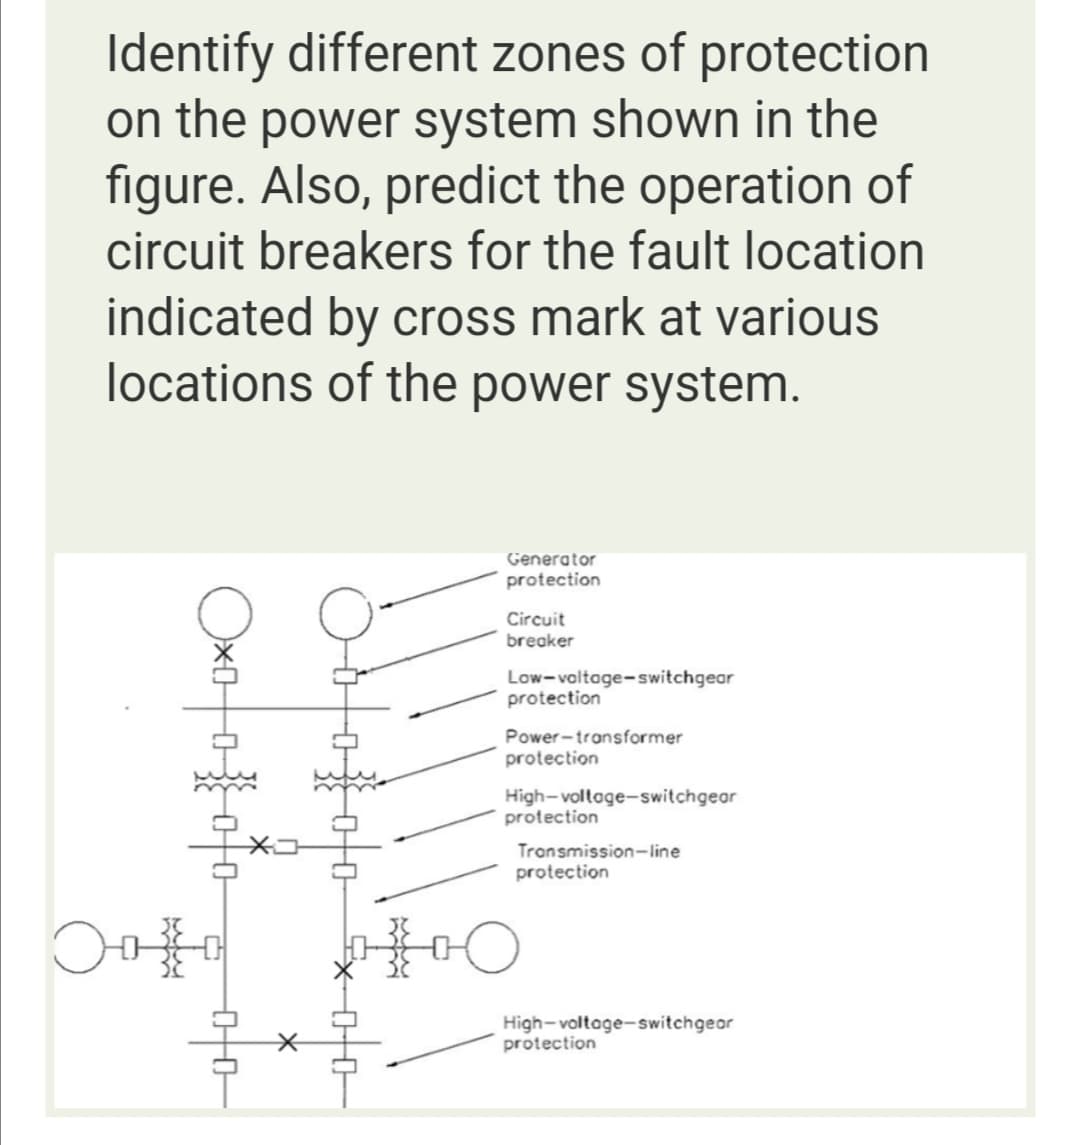 Identify different zones of protection
on the power system shown in the
figure. Also, predict the operation of
circuit breakers for the fault location
indicated by cross mark at various
locations of the power system.
Generator
protection
Circuit
breaker
Low-voltage-switchgear
protection
Power-transformer
protection
High-voltage-switchgeor
protection
Transmission-line
protection
High- voltage-switchgeor
protection
